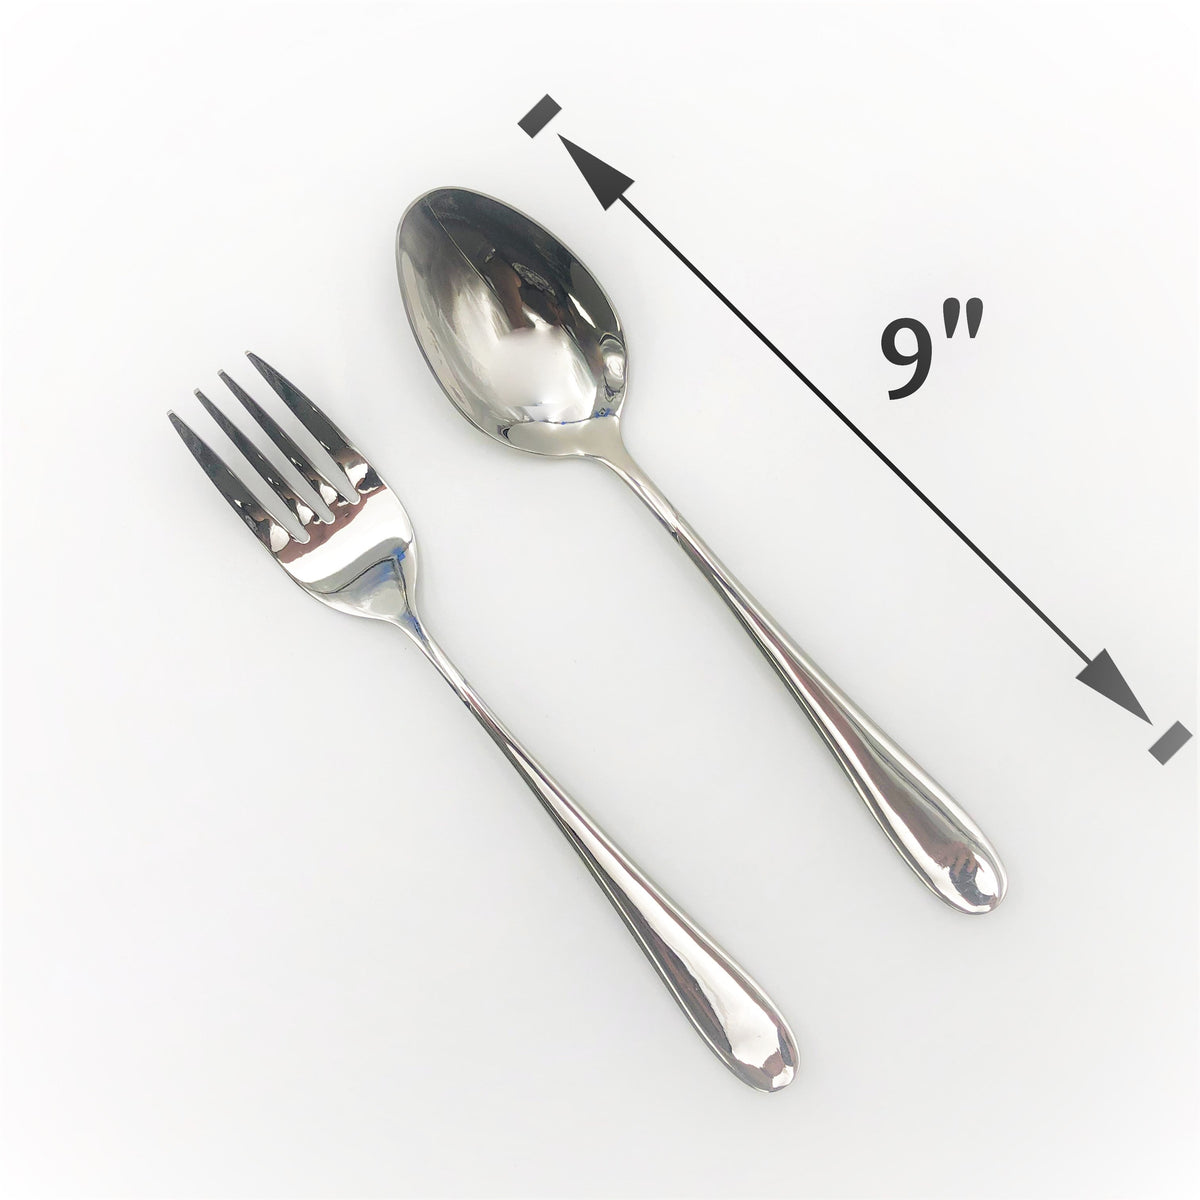 Wilmax Stainless Steel Serving Fork And Knife Set Of 2 Pieces Great For Entertaining SKU: WL-555048